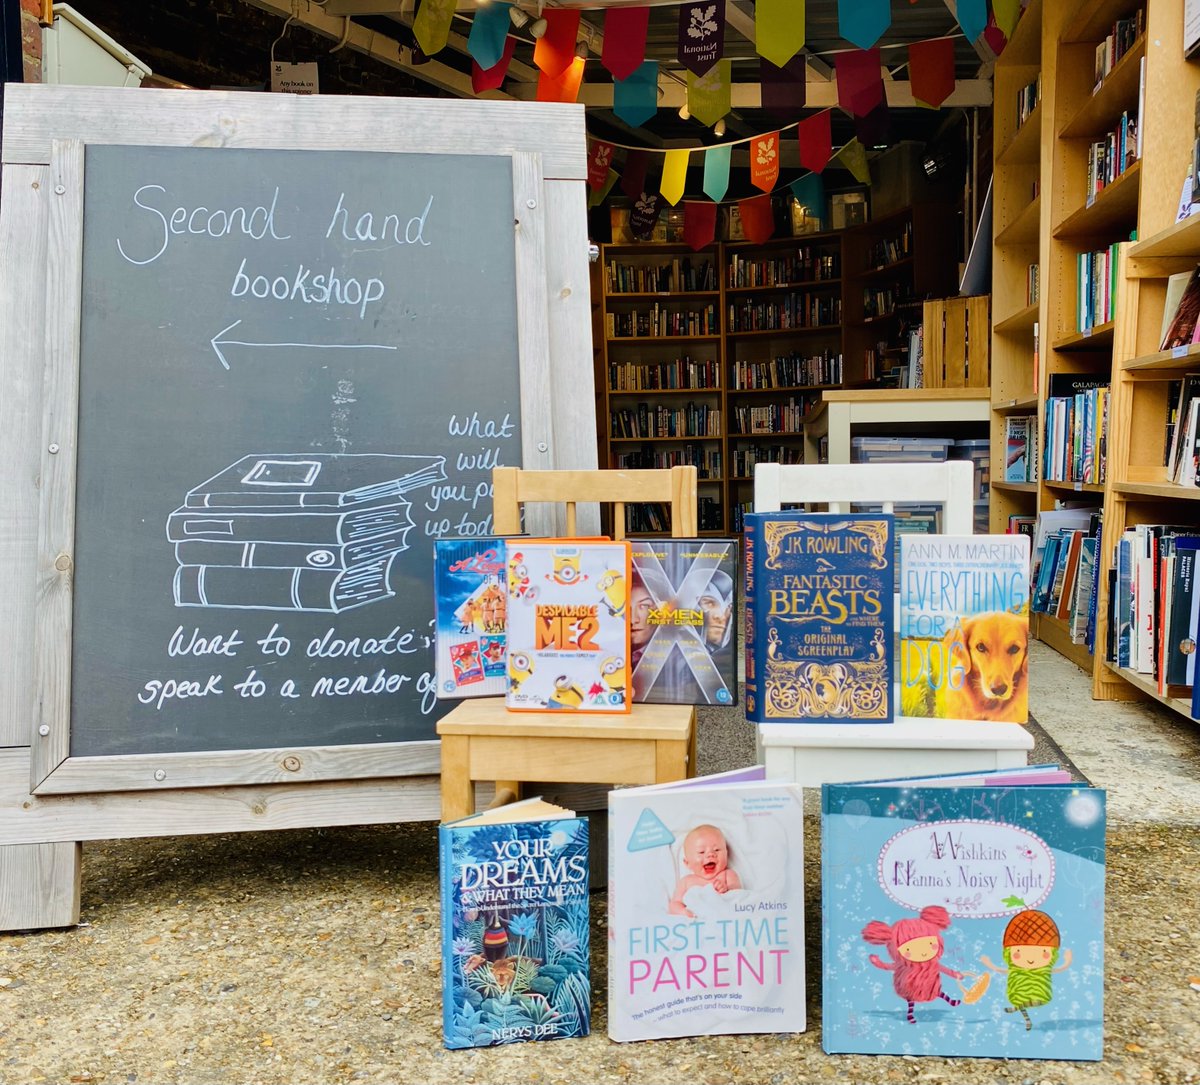 📚 Calling all bookworms-head to our pop-up family book sales each Wednesday of the summer holidays! 📚 Clearing out? We'd love donations of books for children, teens & family-friendly subjects🤩thank you 🙏 #books #bookshop #summer #familyfriendly #VisitRichmond @southeastNT